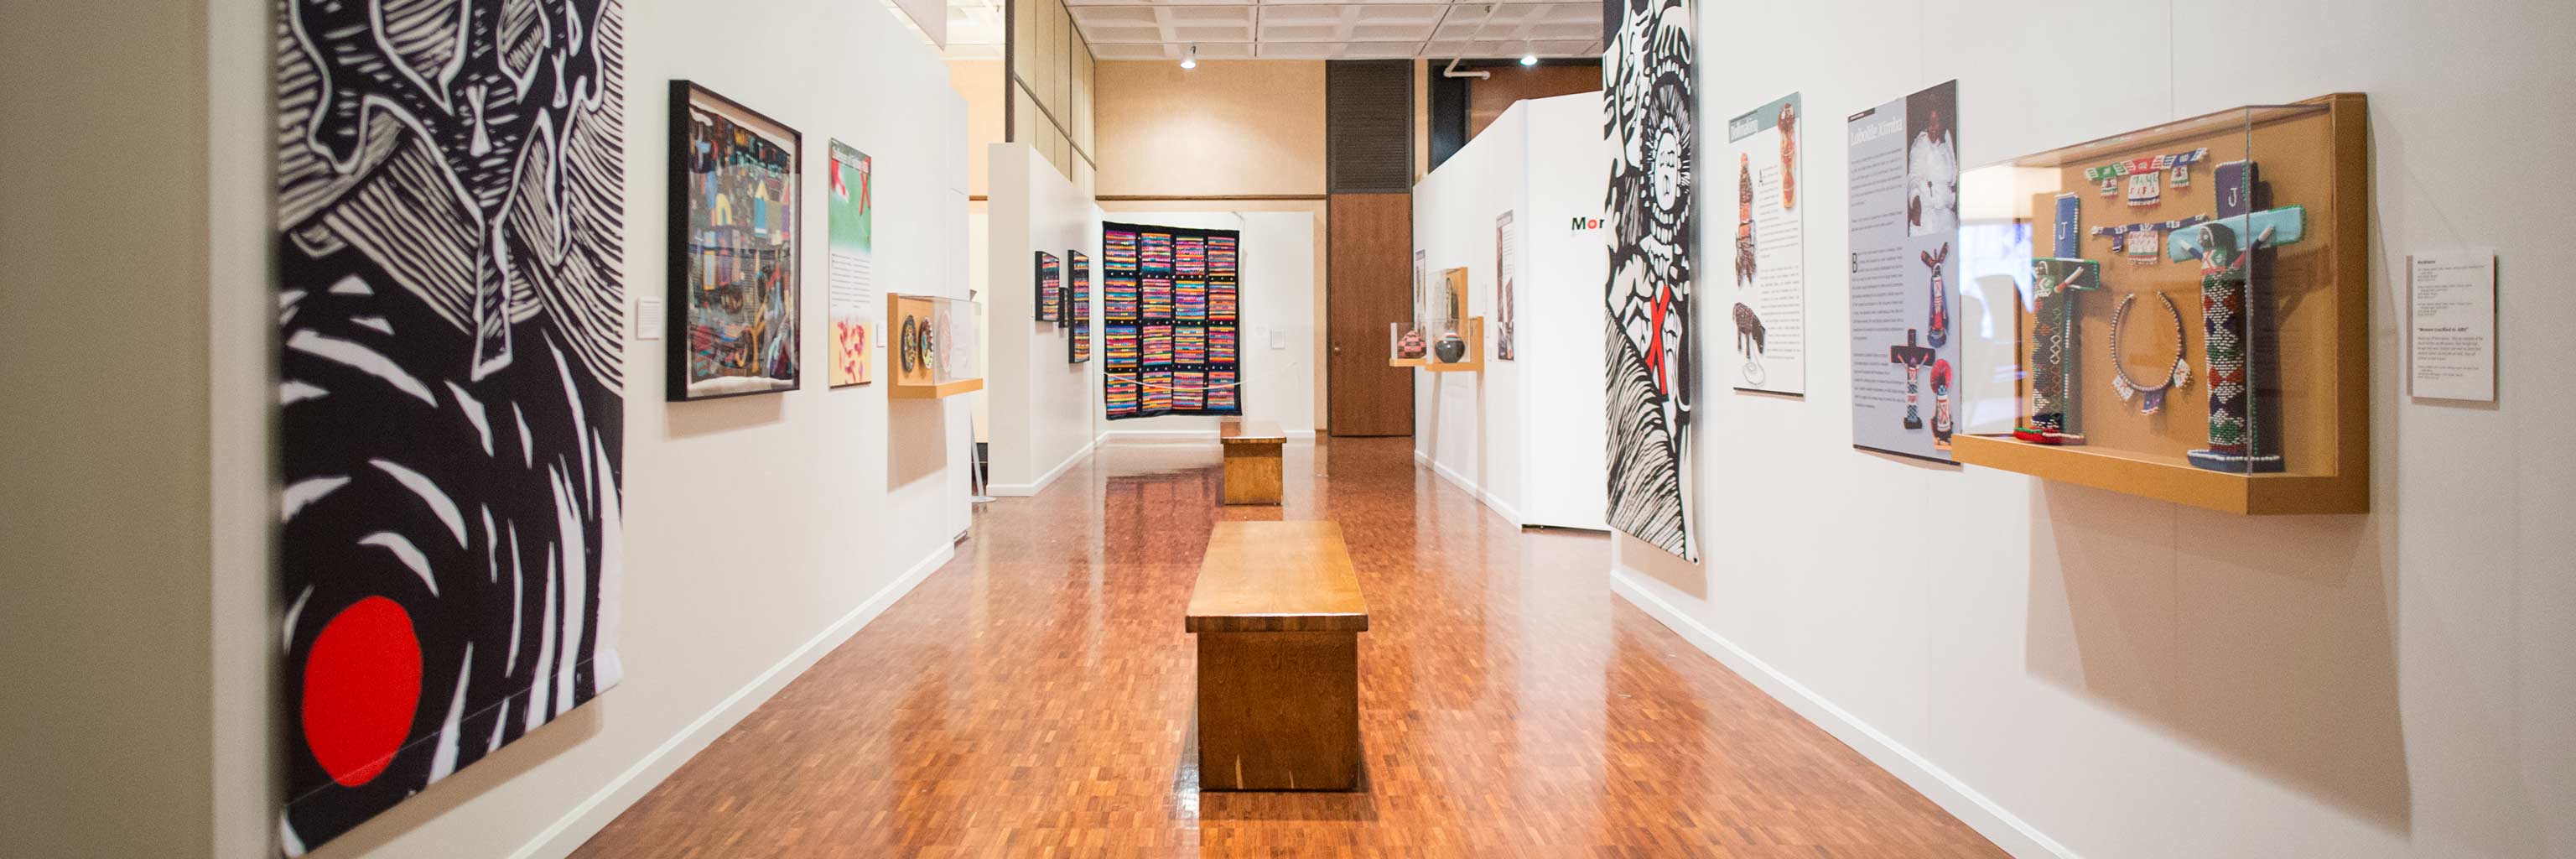 Image of a gallery on the Indiana University Bloomington campus.